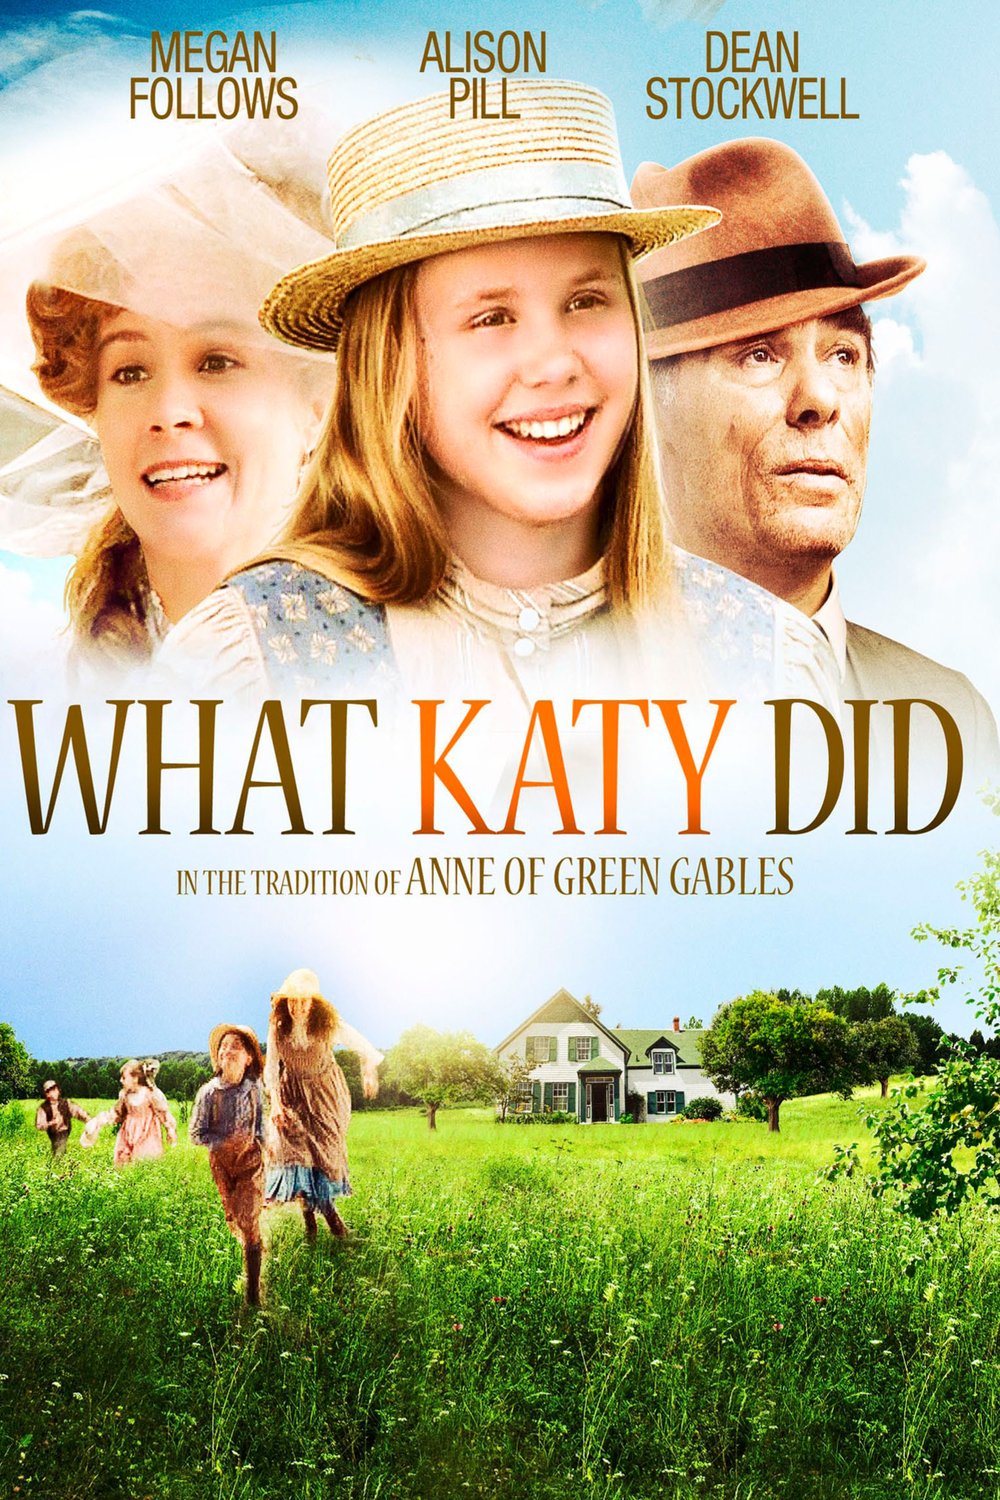 Poster of the movie What Katy Did